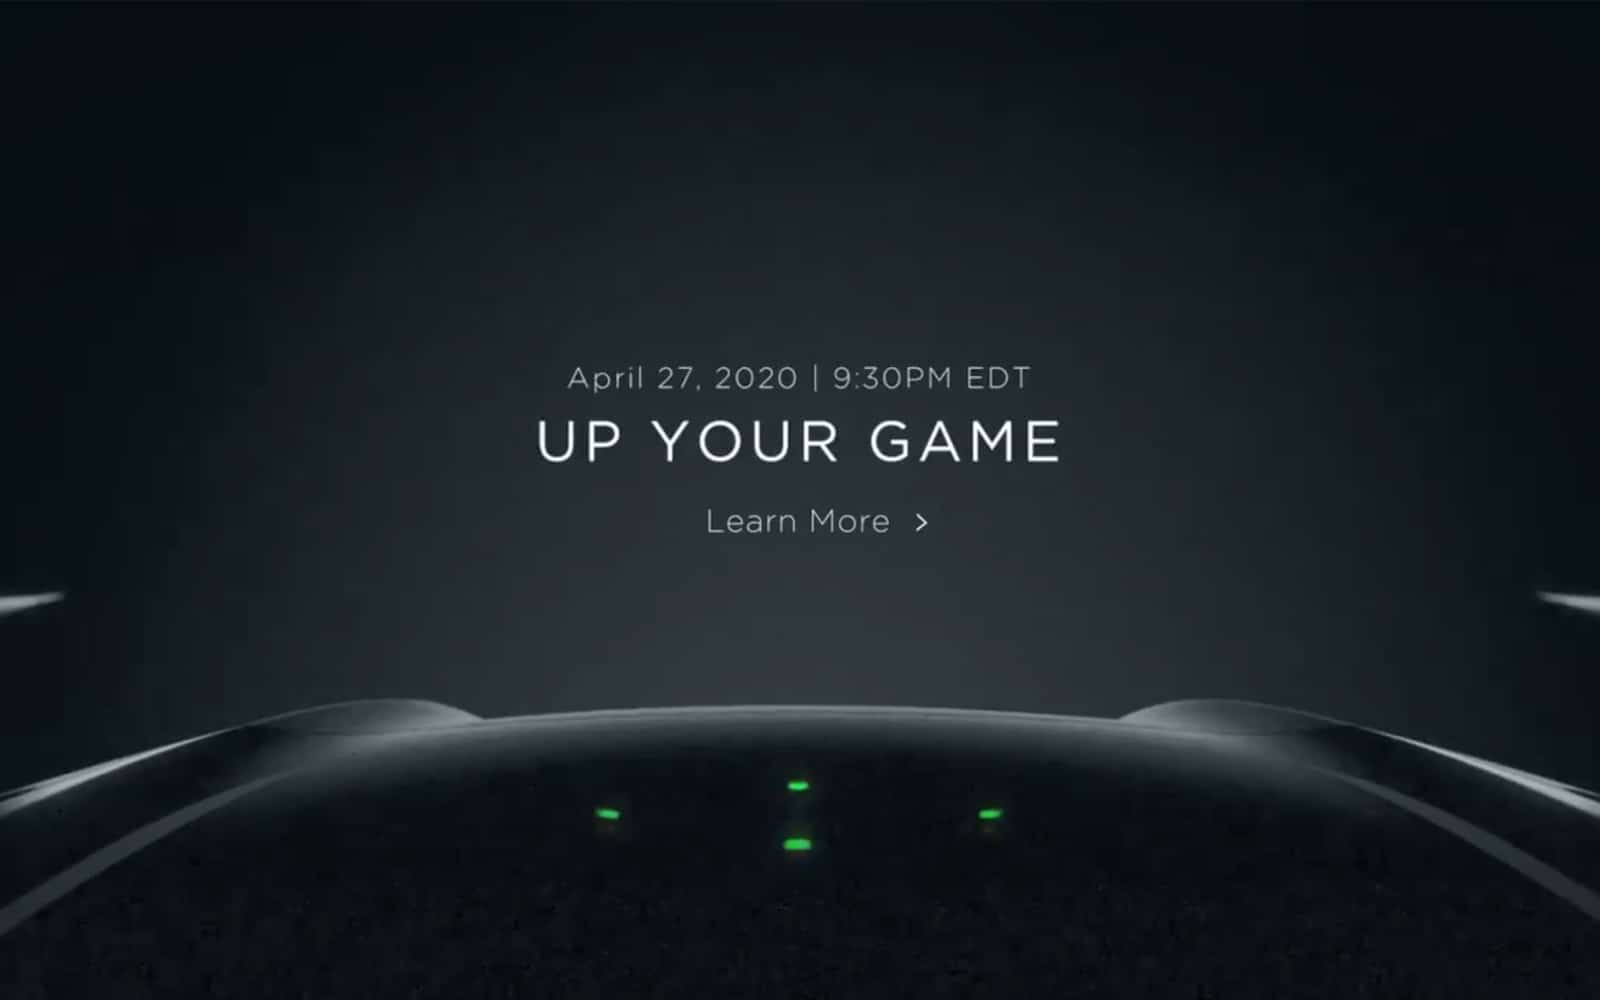 DJI Launch Event - Up Your Game